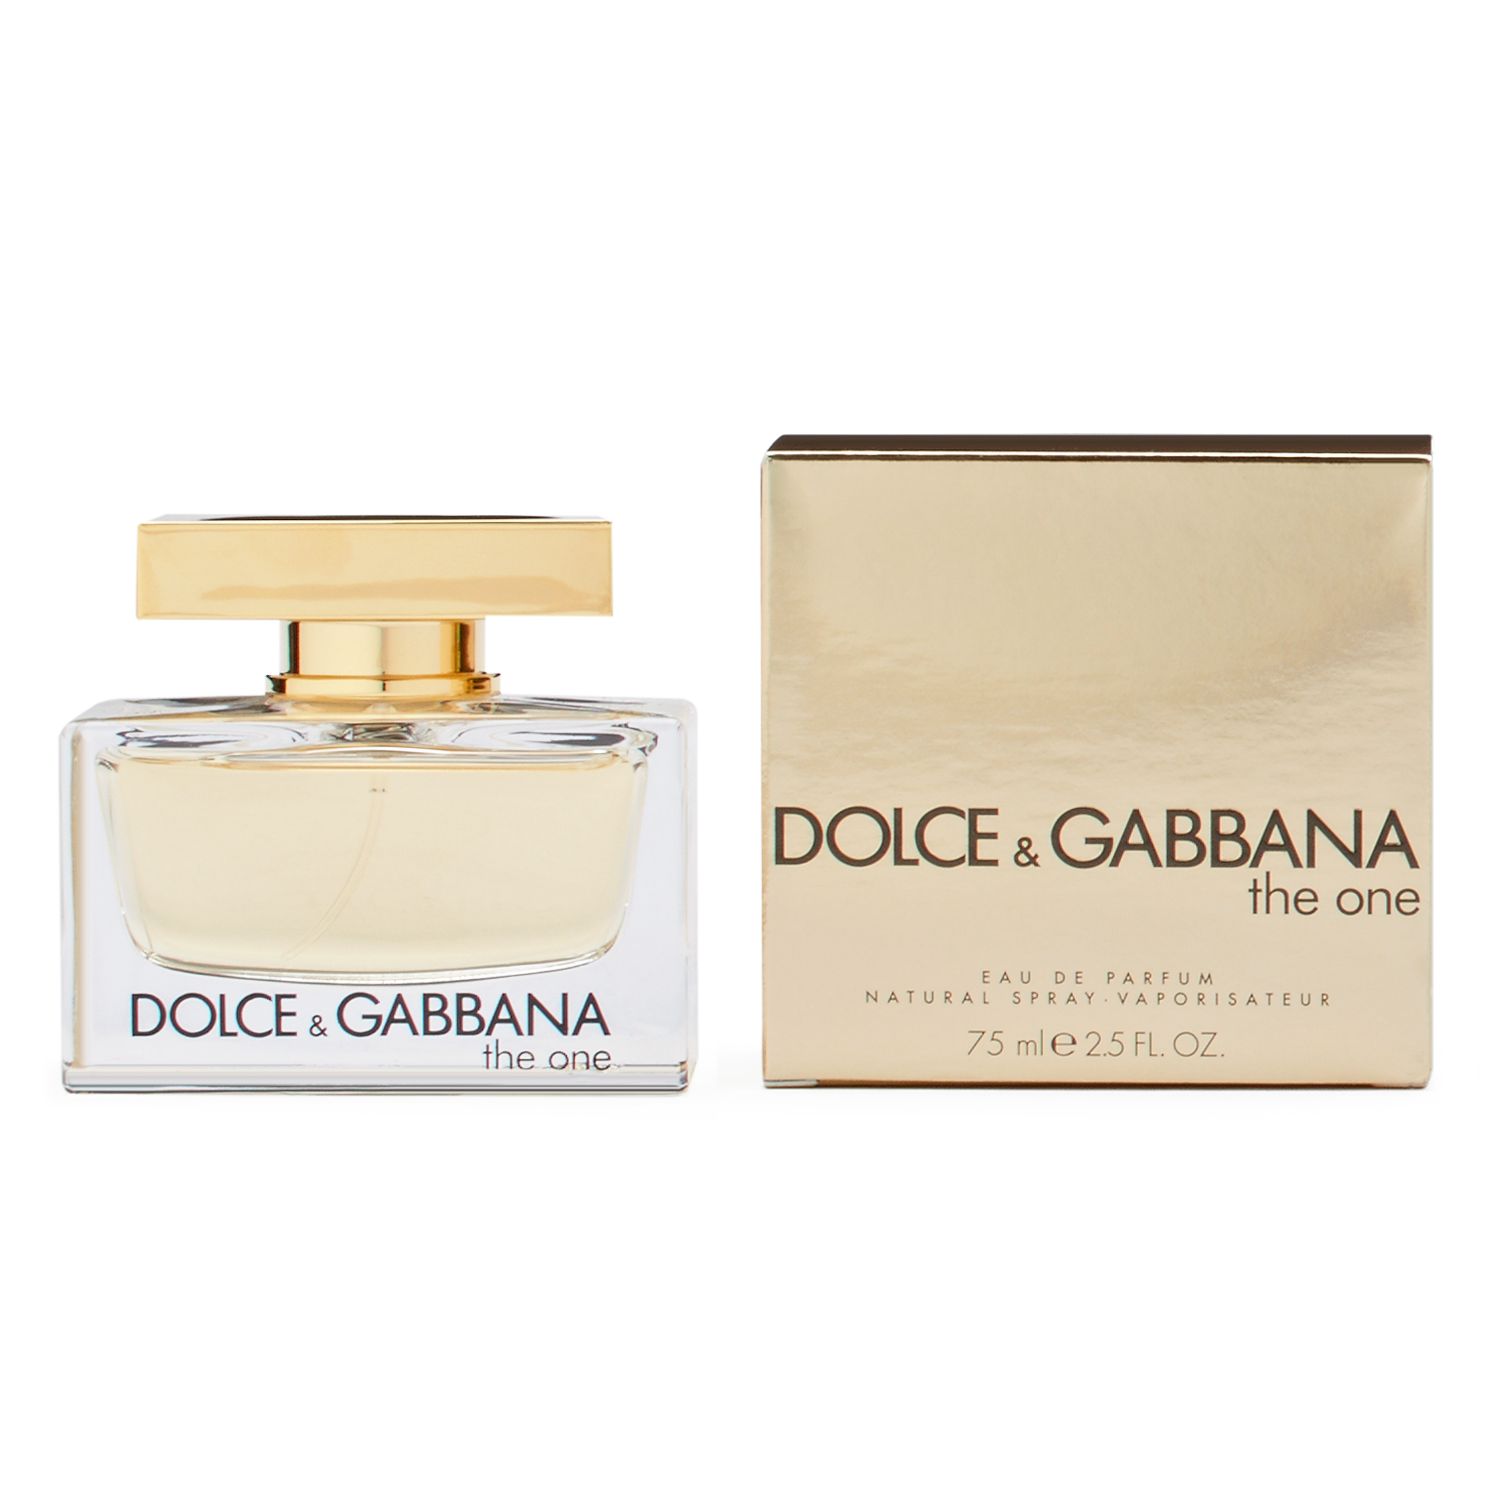 dolce and gabbana the one kohls